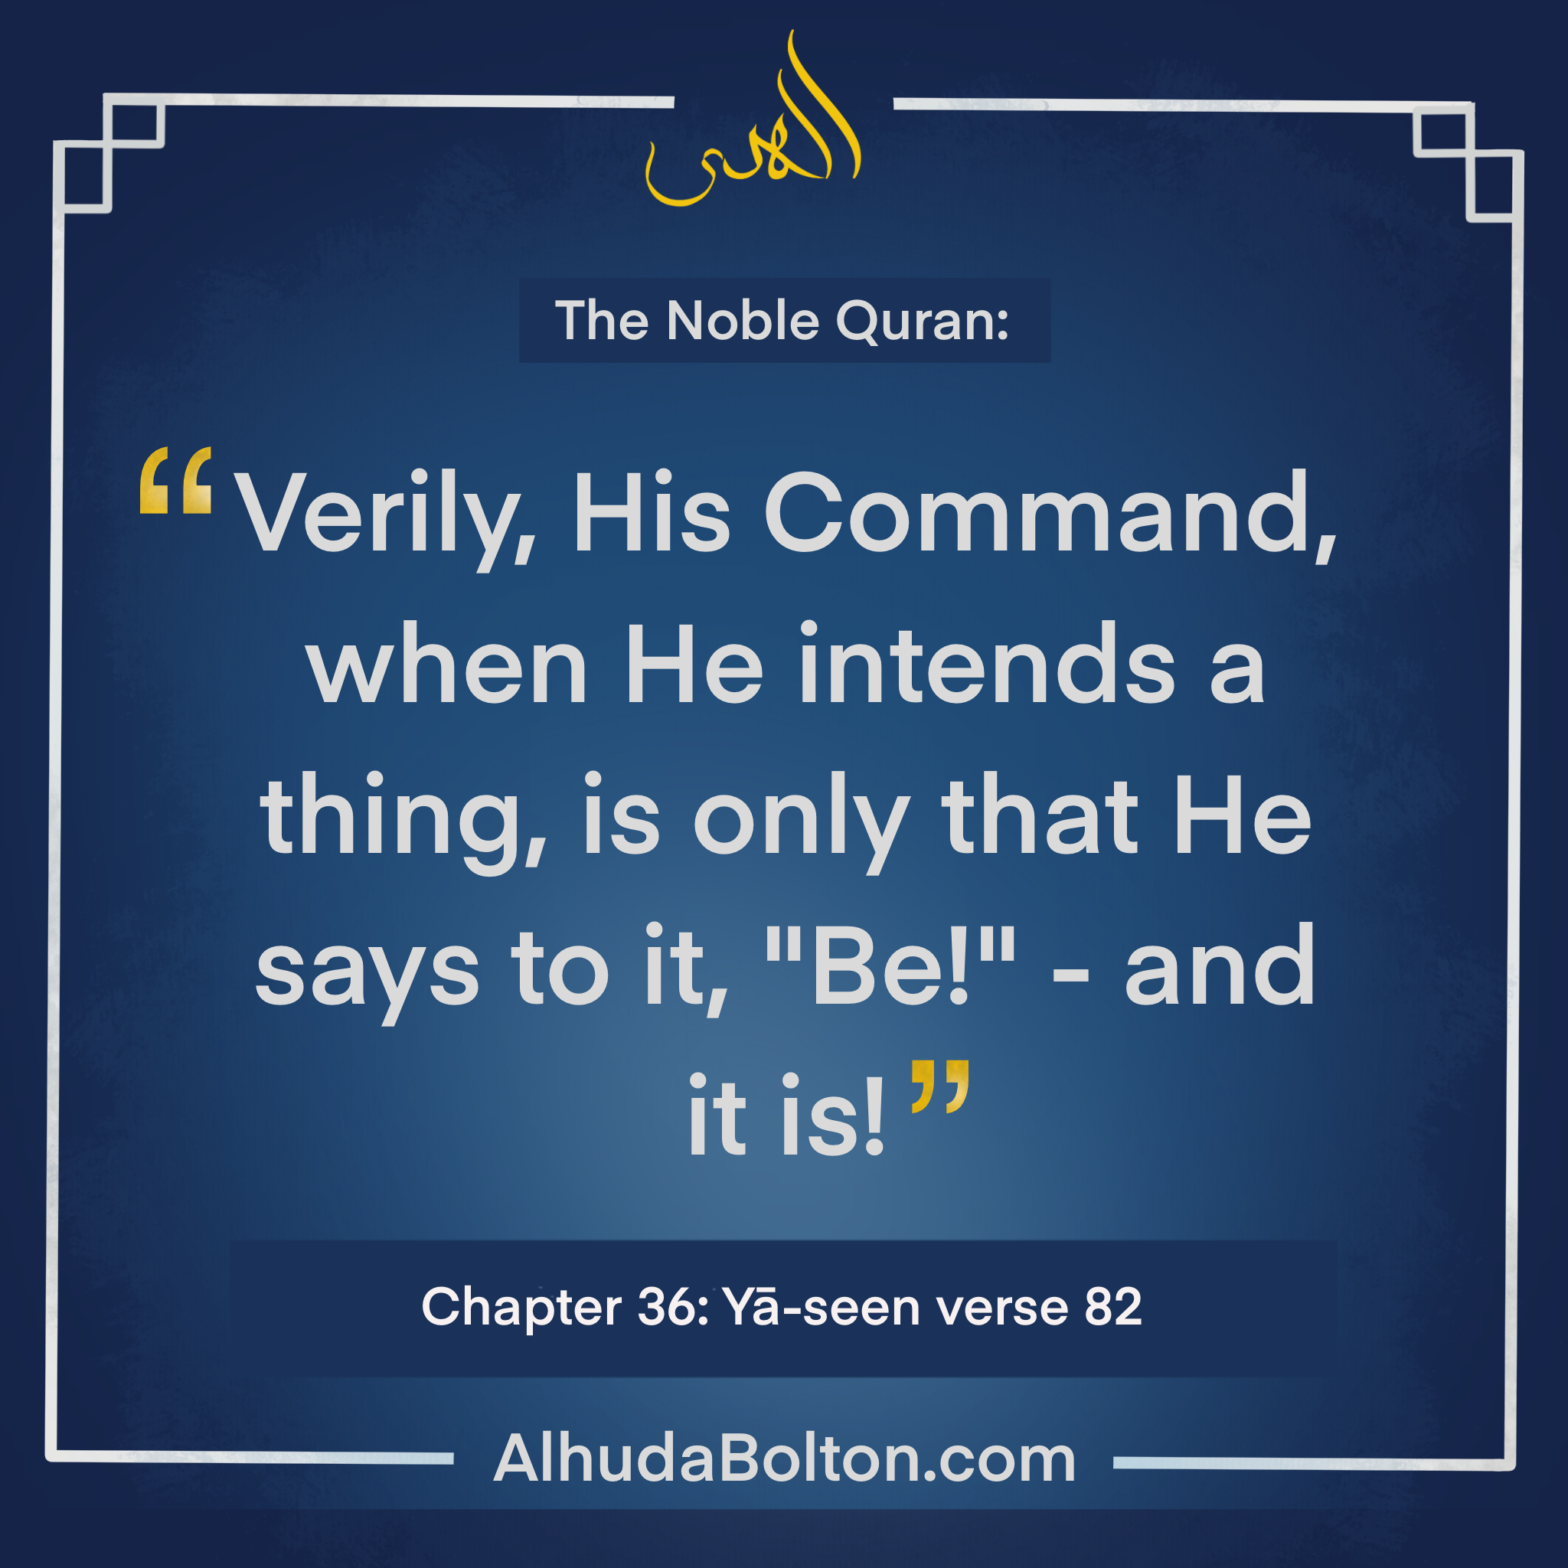 Quran: “Be” and it is